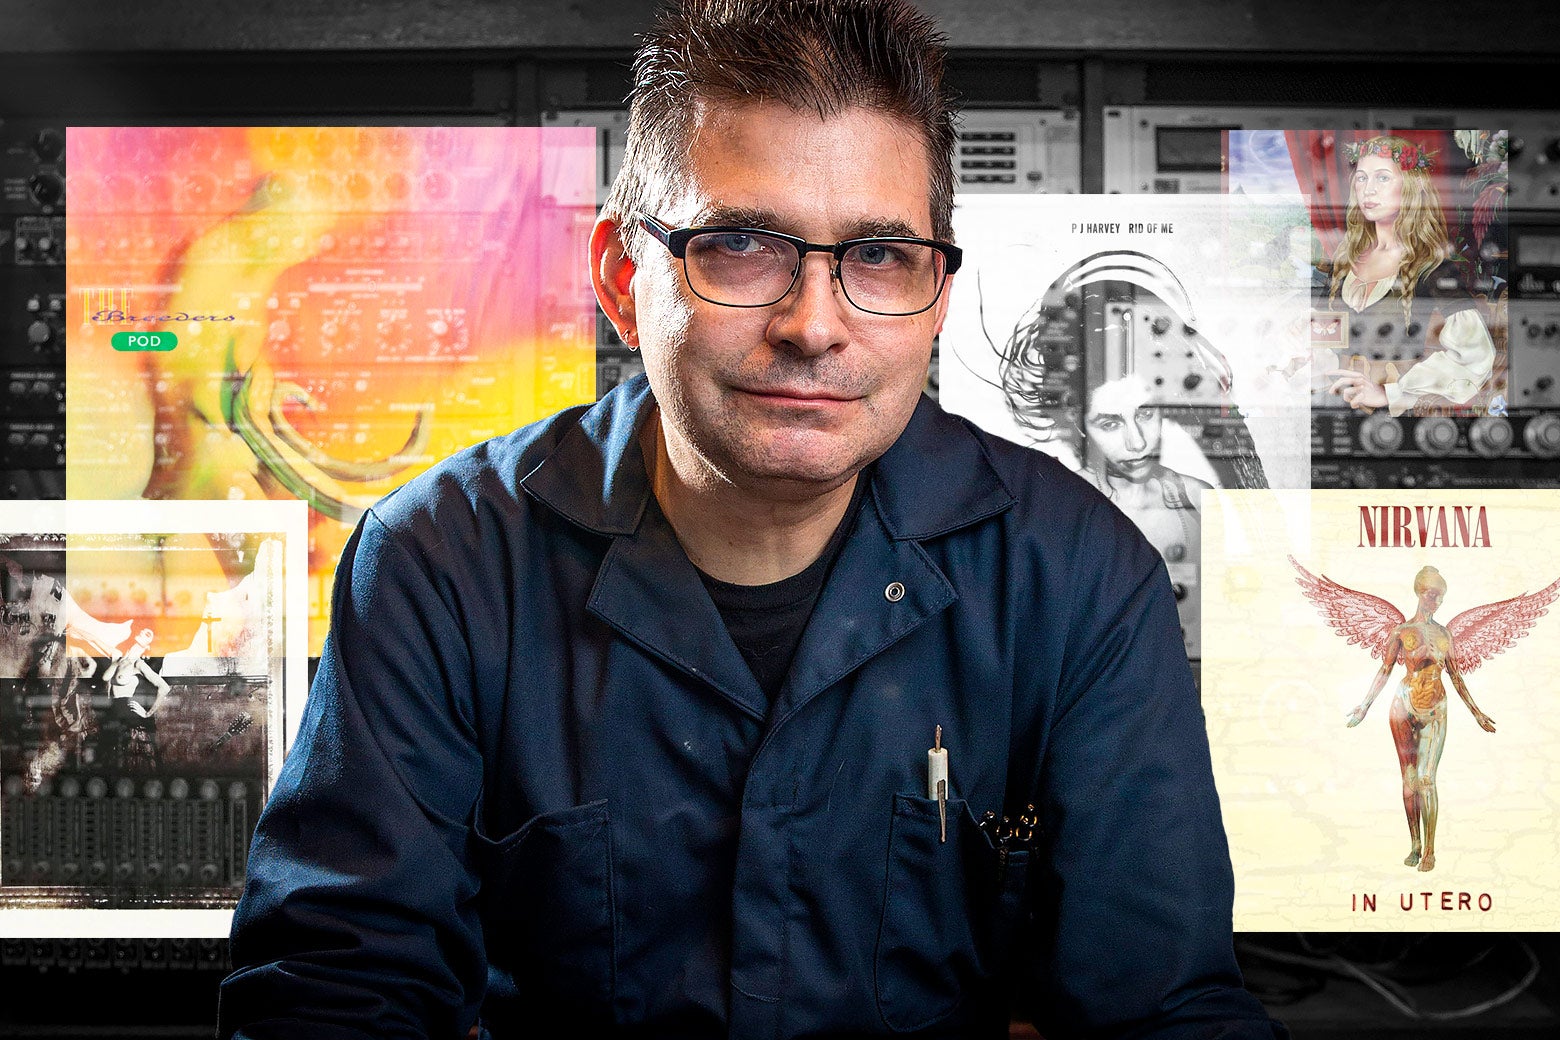 A photo of Steve Albini surrounded by the covers of some of the albums he produced: Nirvana's In Utero, Pixies' Surfer Rosa, and albums by PJ Harvey, Joanna Newsom, and the Breeders